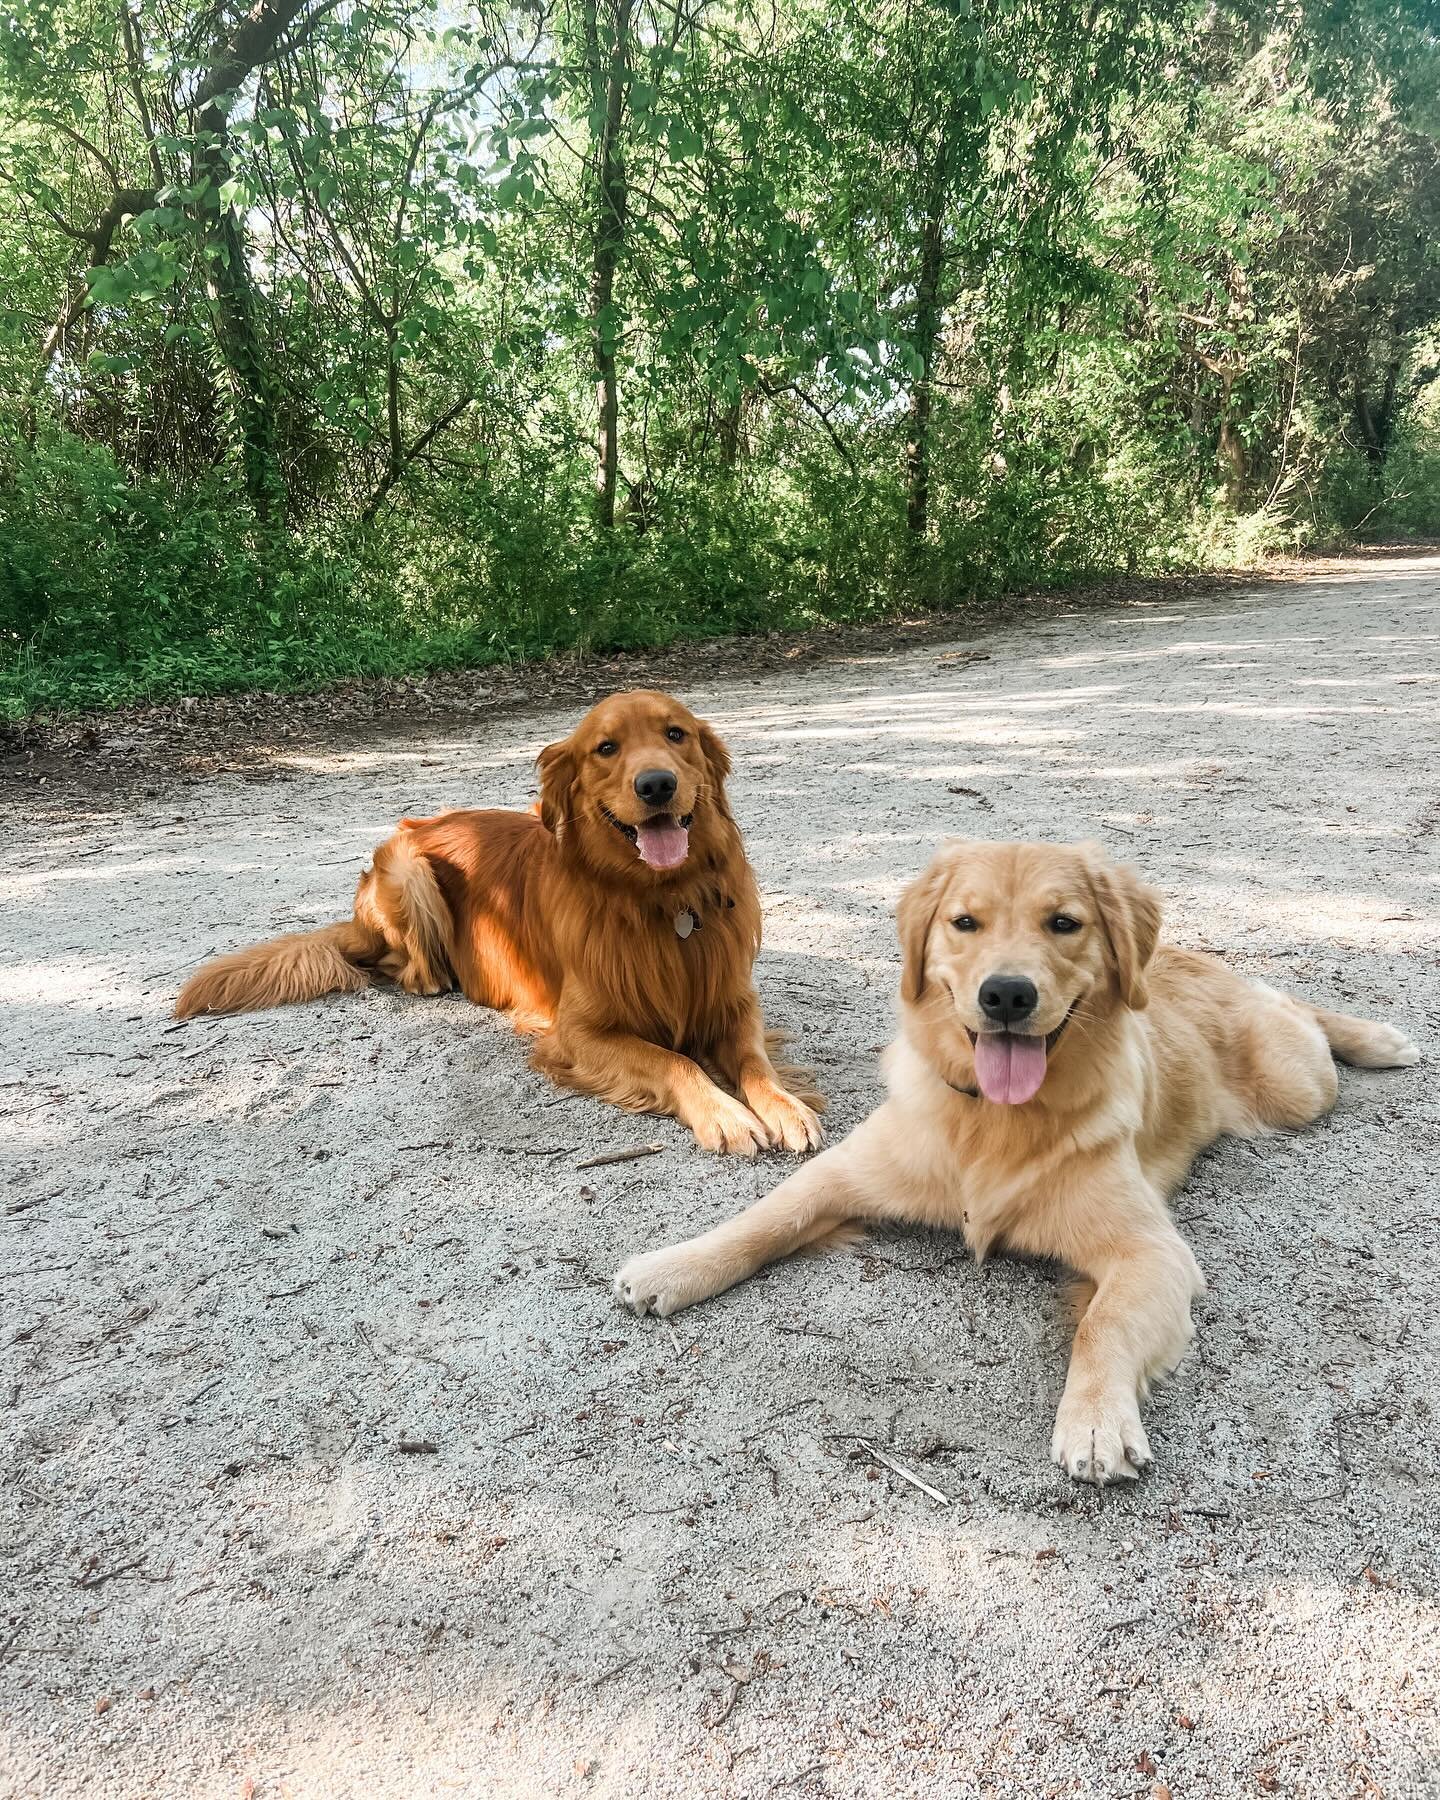 ✨Golden days✨

Comment below and tell me your favorite thing to do with your dog! Or, what do you wish you could do with your dog that seems impossible? 

Nothing beats an off leash explorative hike for me🙌🏻.

#goldenretriever #goldenpuppy #goldenr